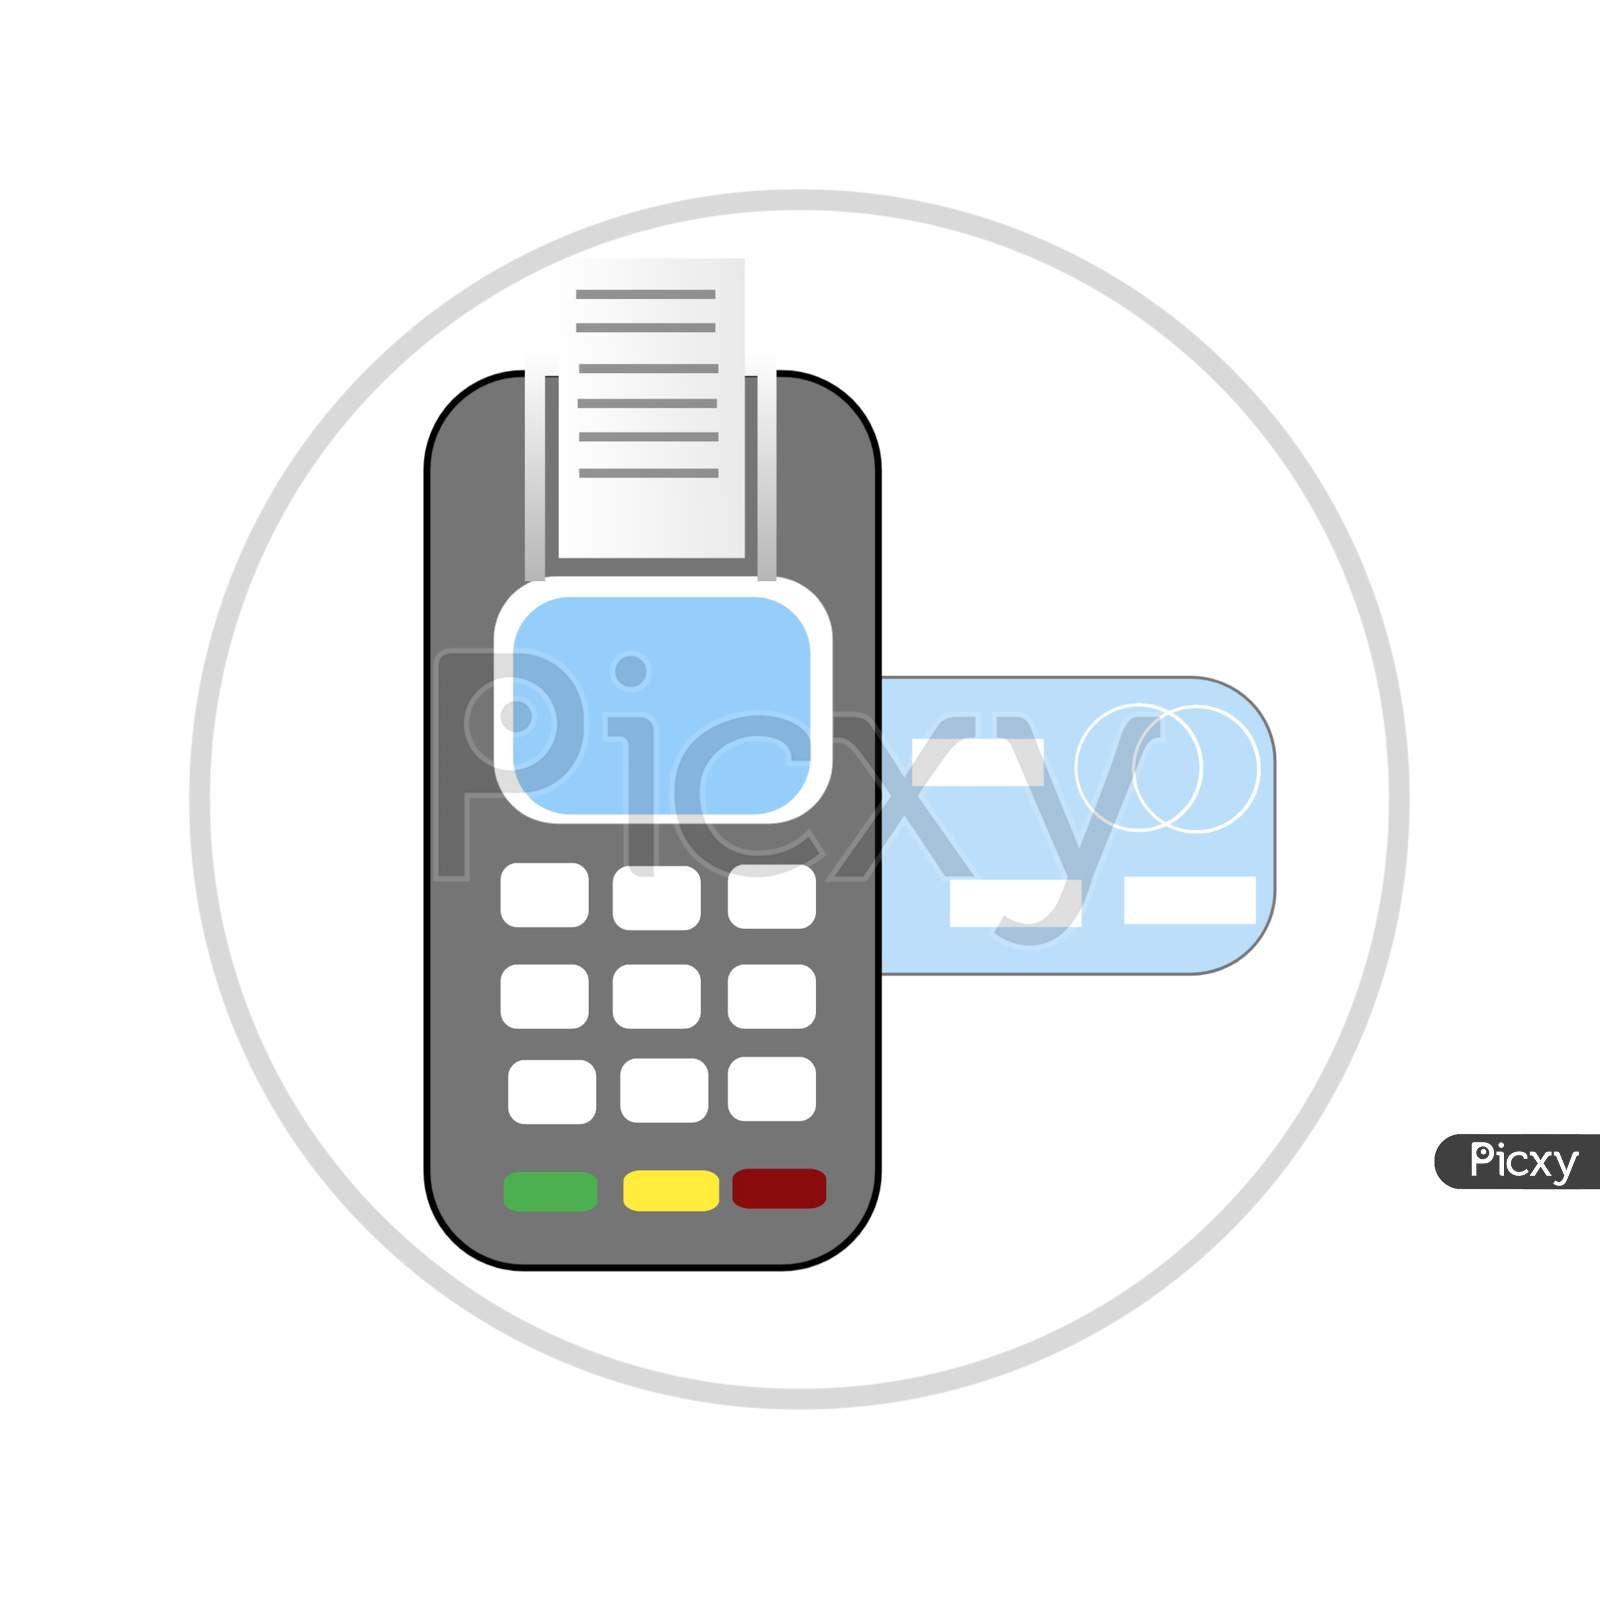 Pos terminal icon with card in flat design